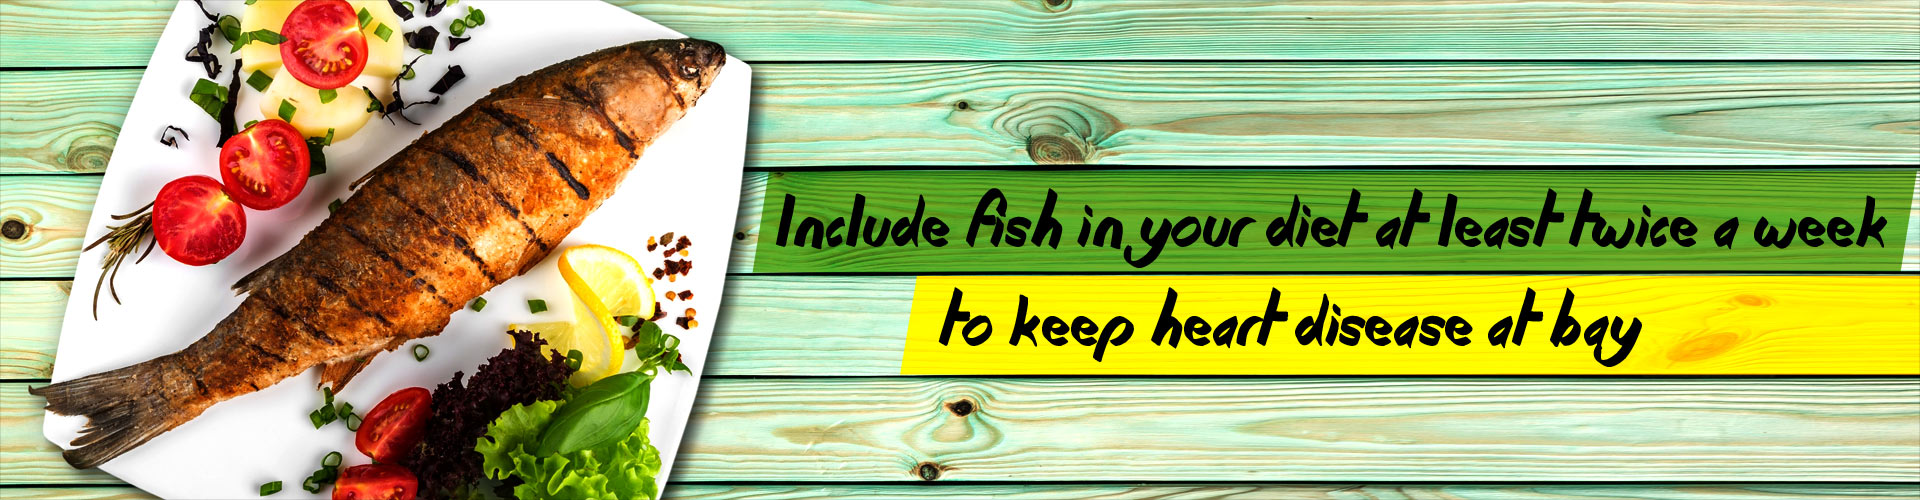 Include fish in your diet at least twice a week to keep heart disease at bay
